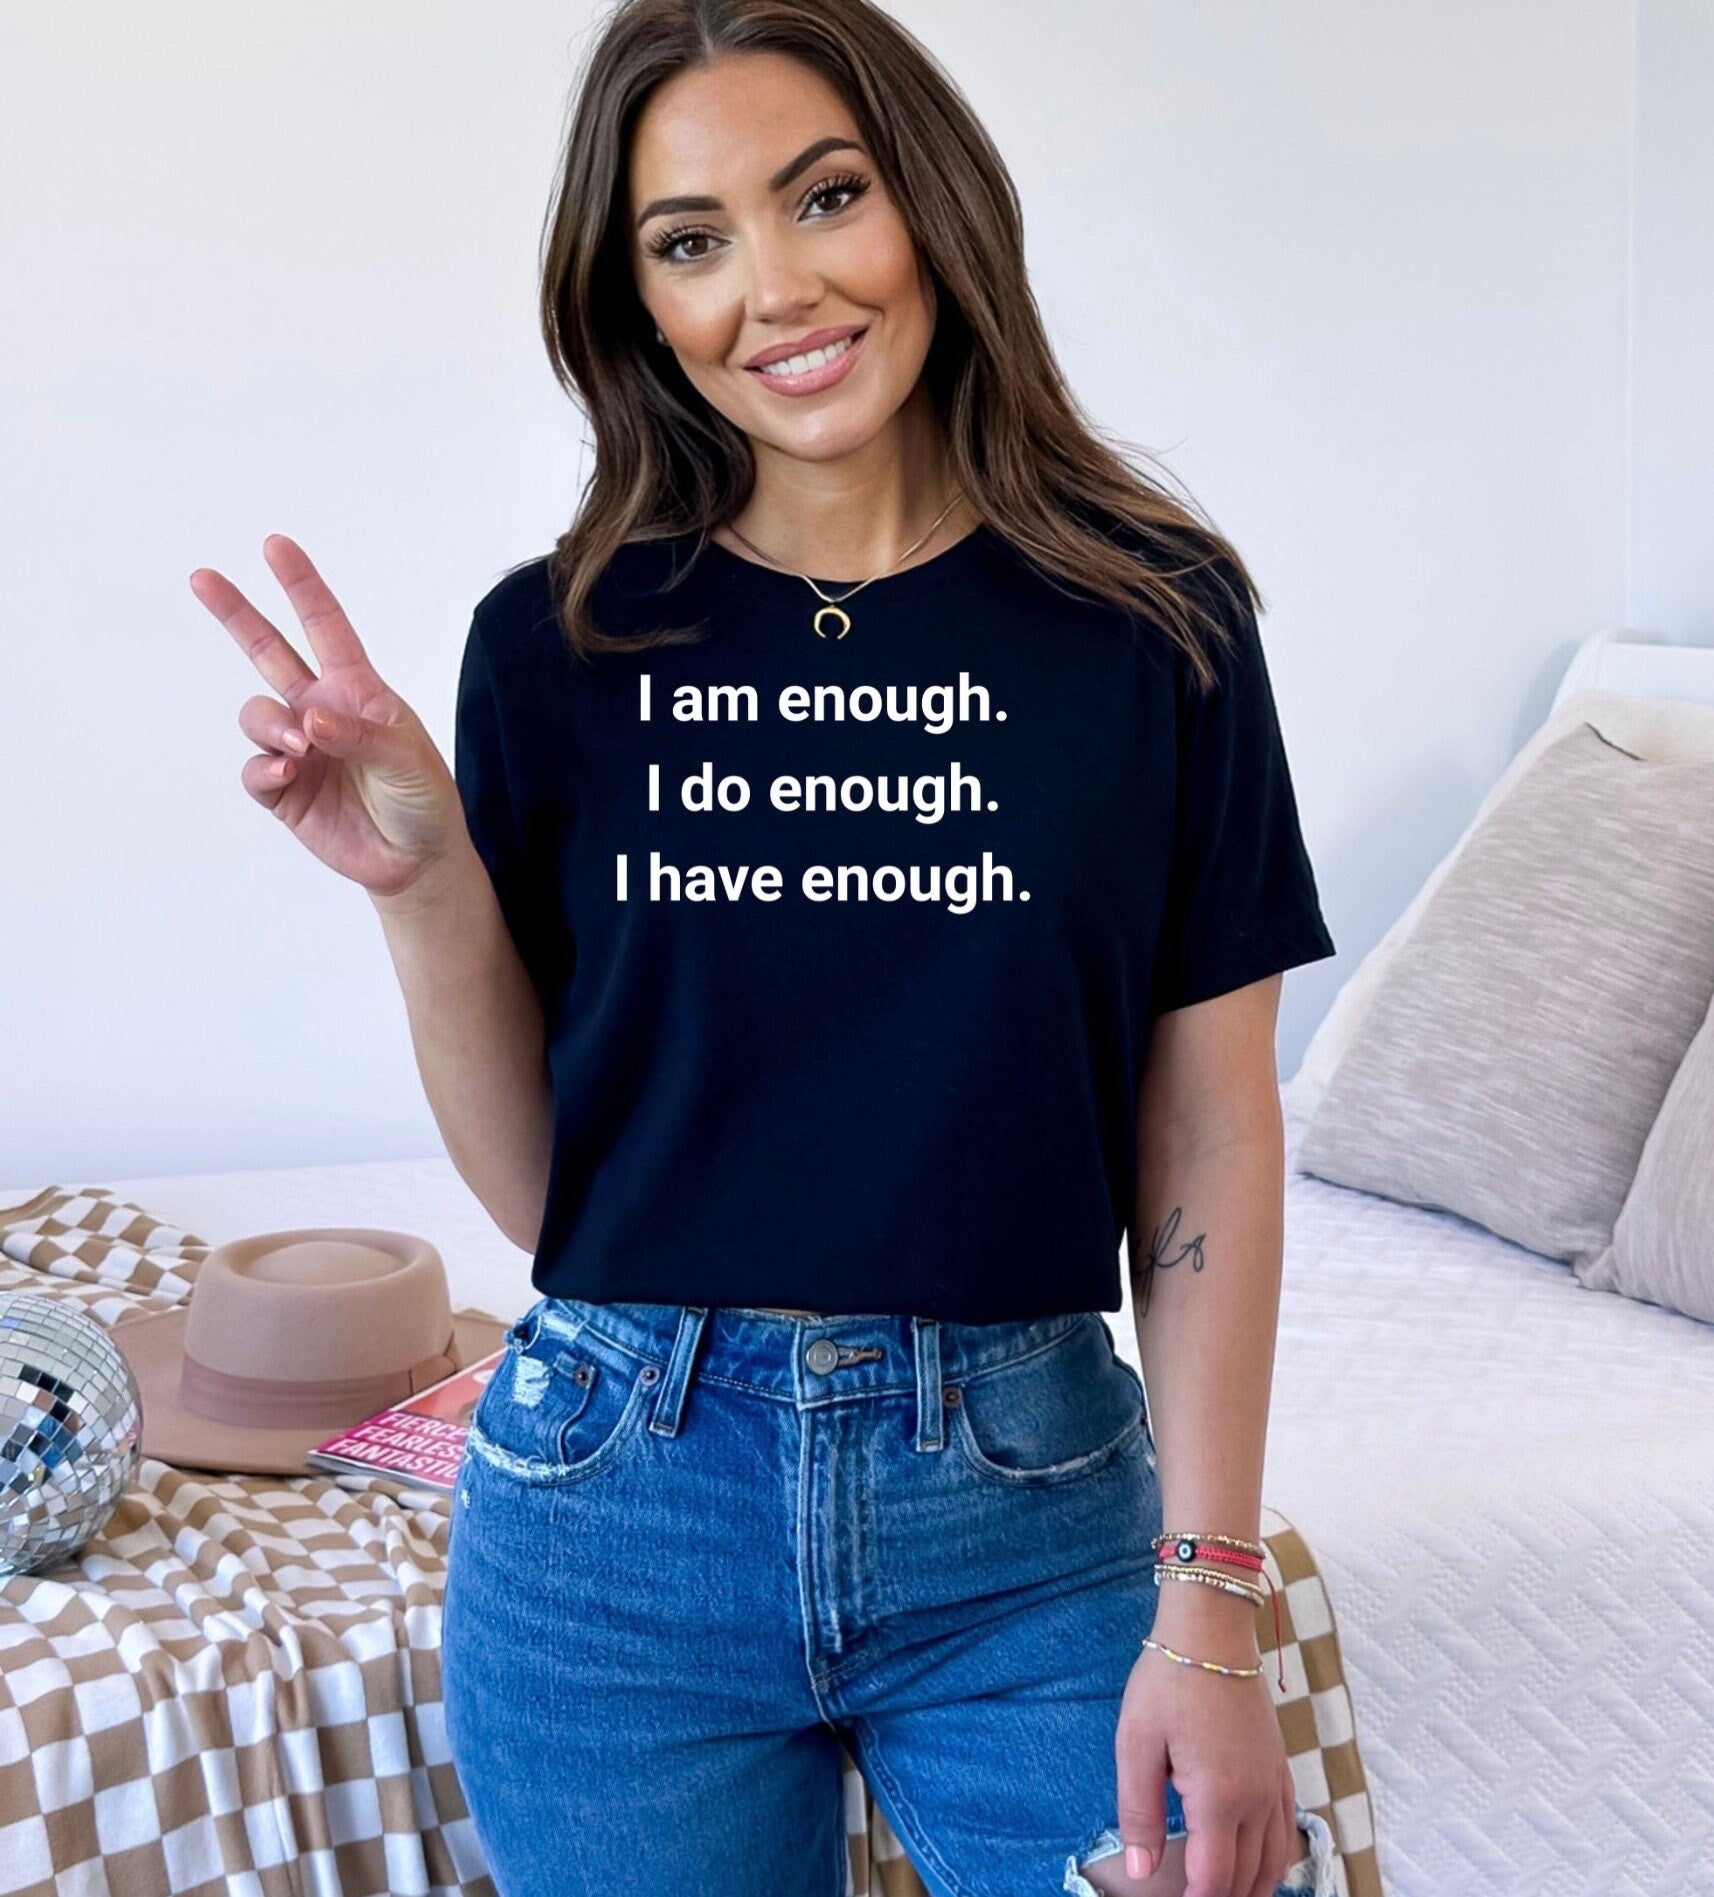 I Am Enough Sweatshirt, I Do Enough Tee, I Have Enough Crewneck, Hospital Gift, Oversized Sweater, Comfy Sweater, Mental Awareness, Get Well